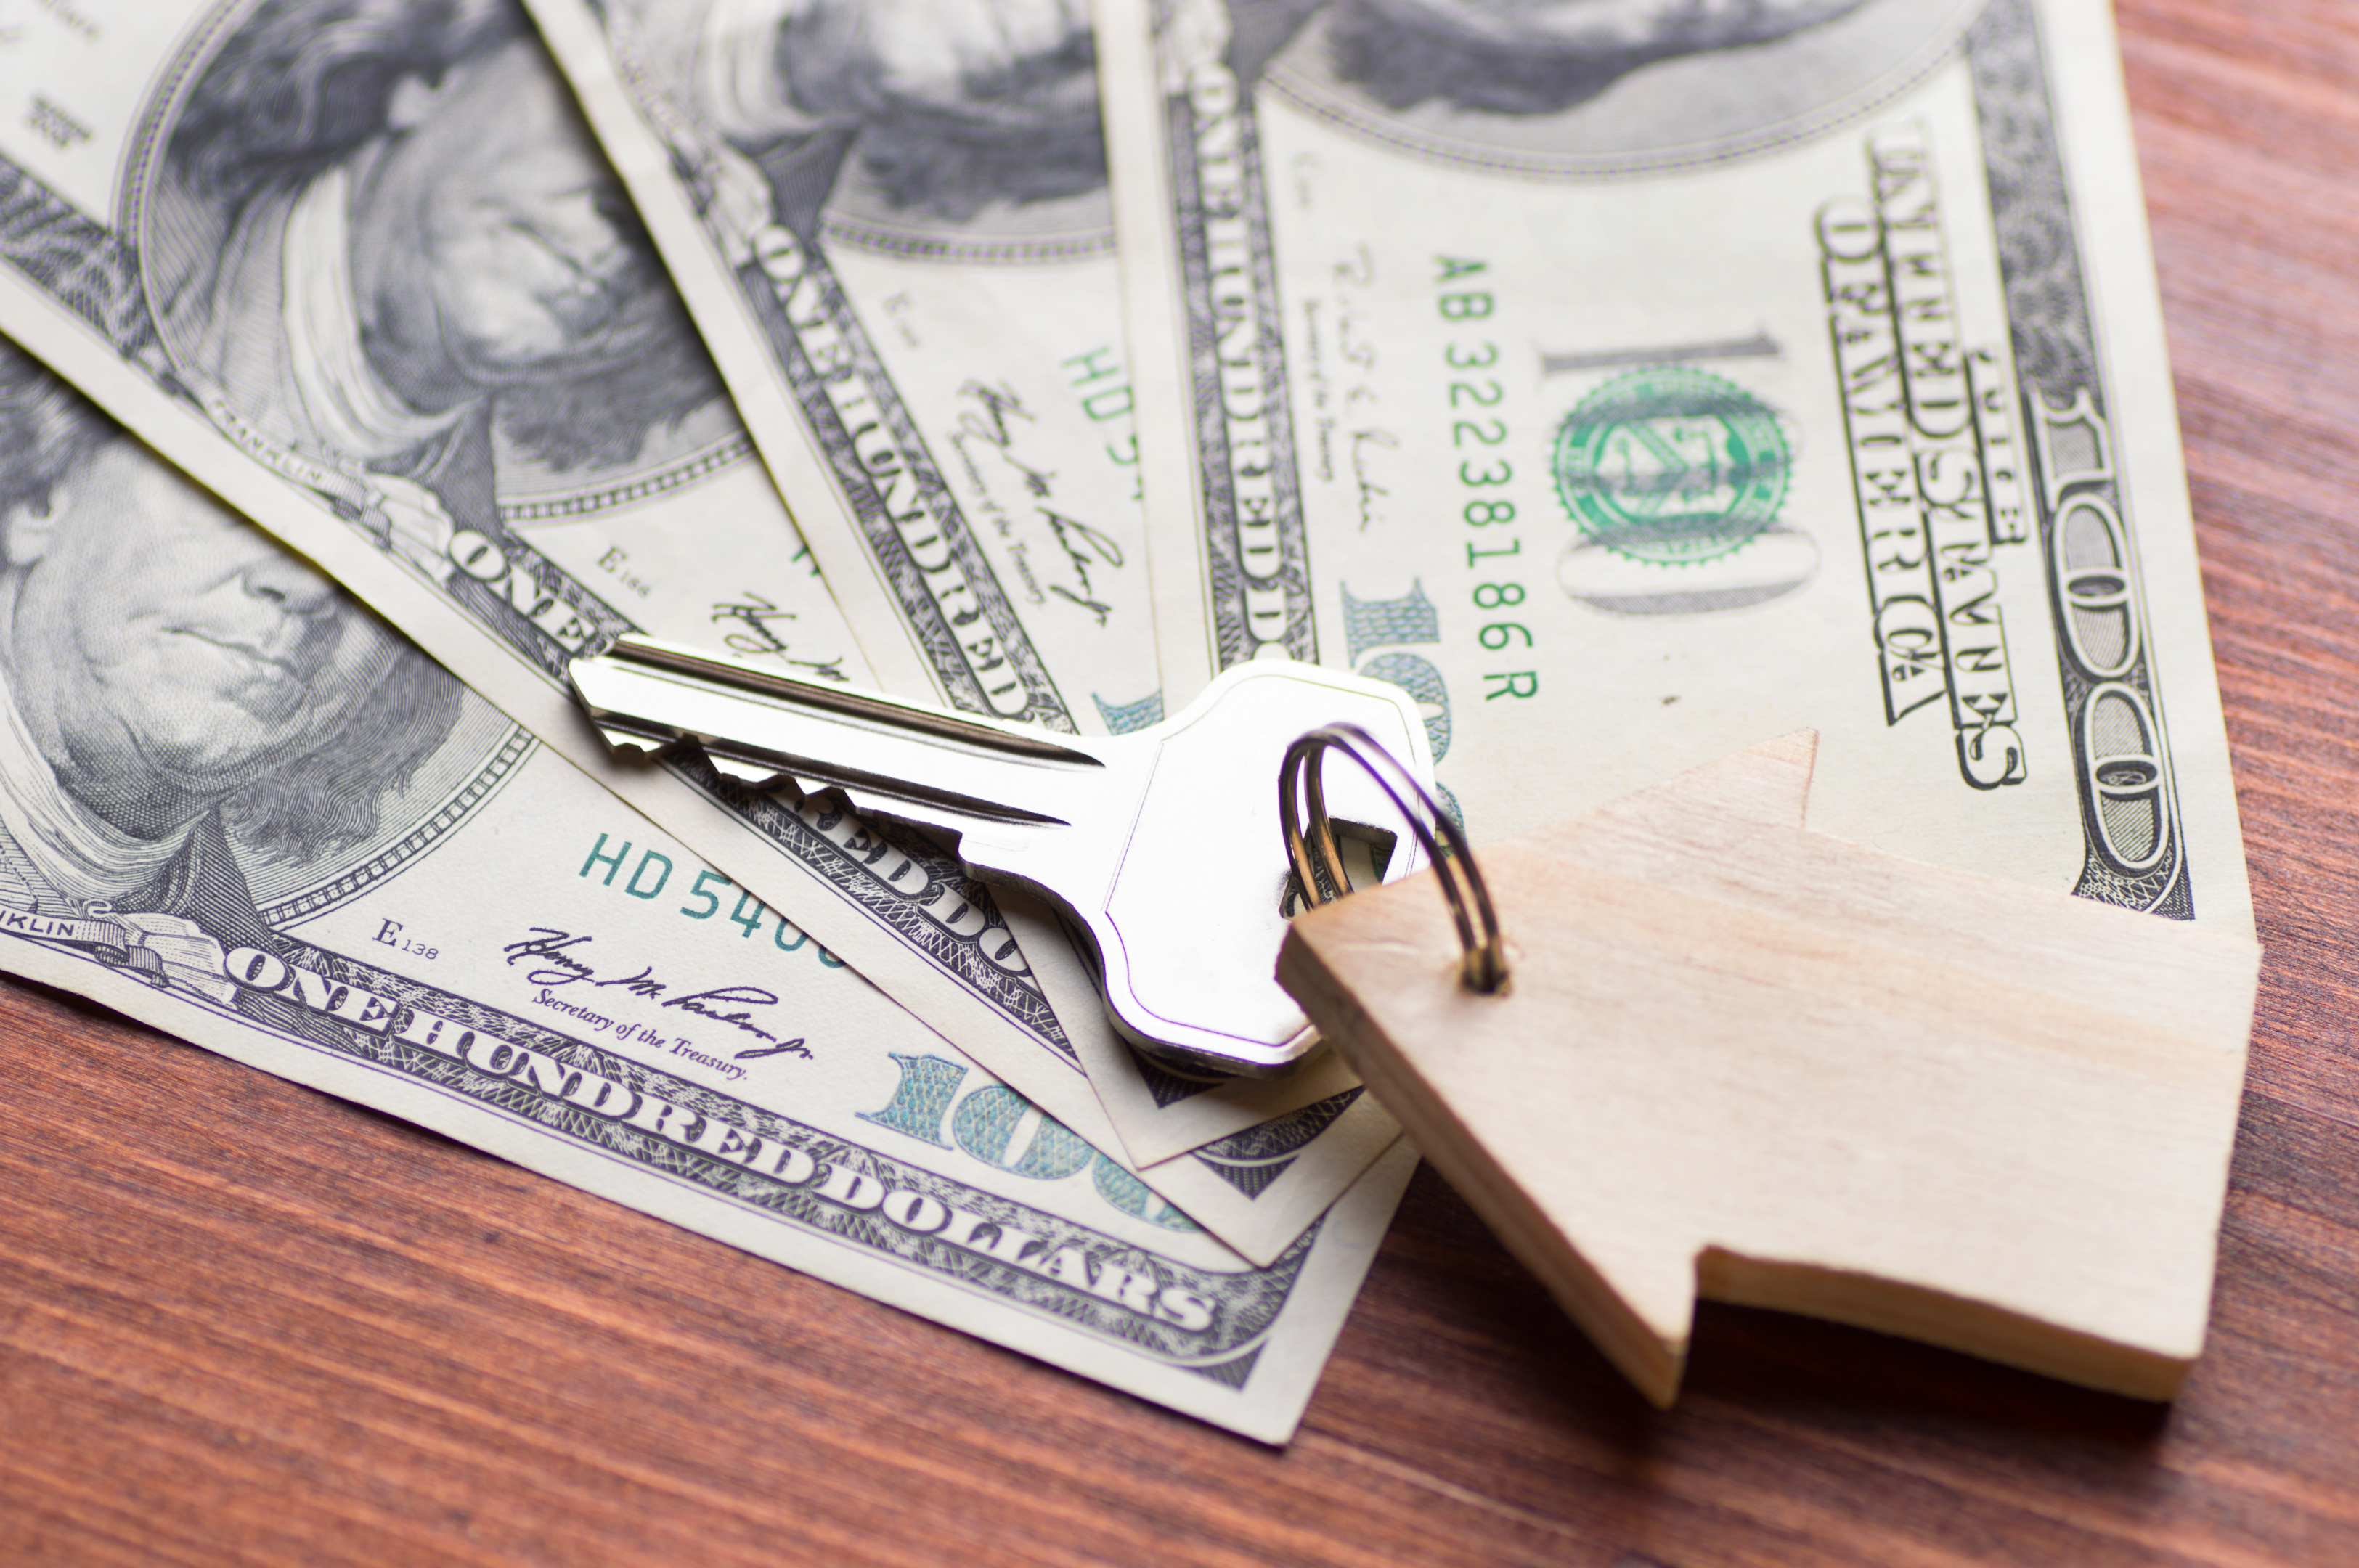 a house key on top of money symbolizing escrow account